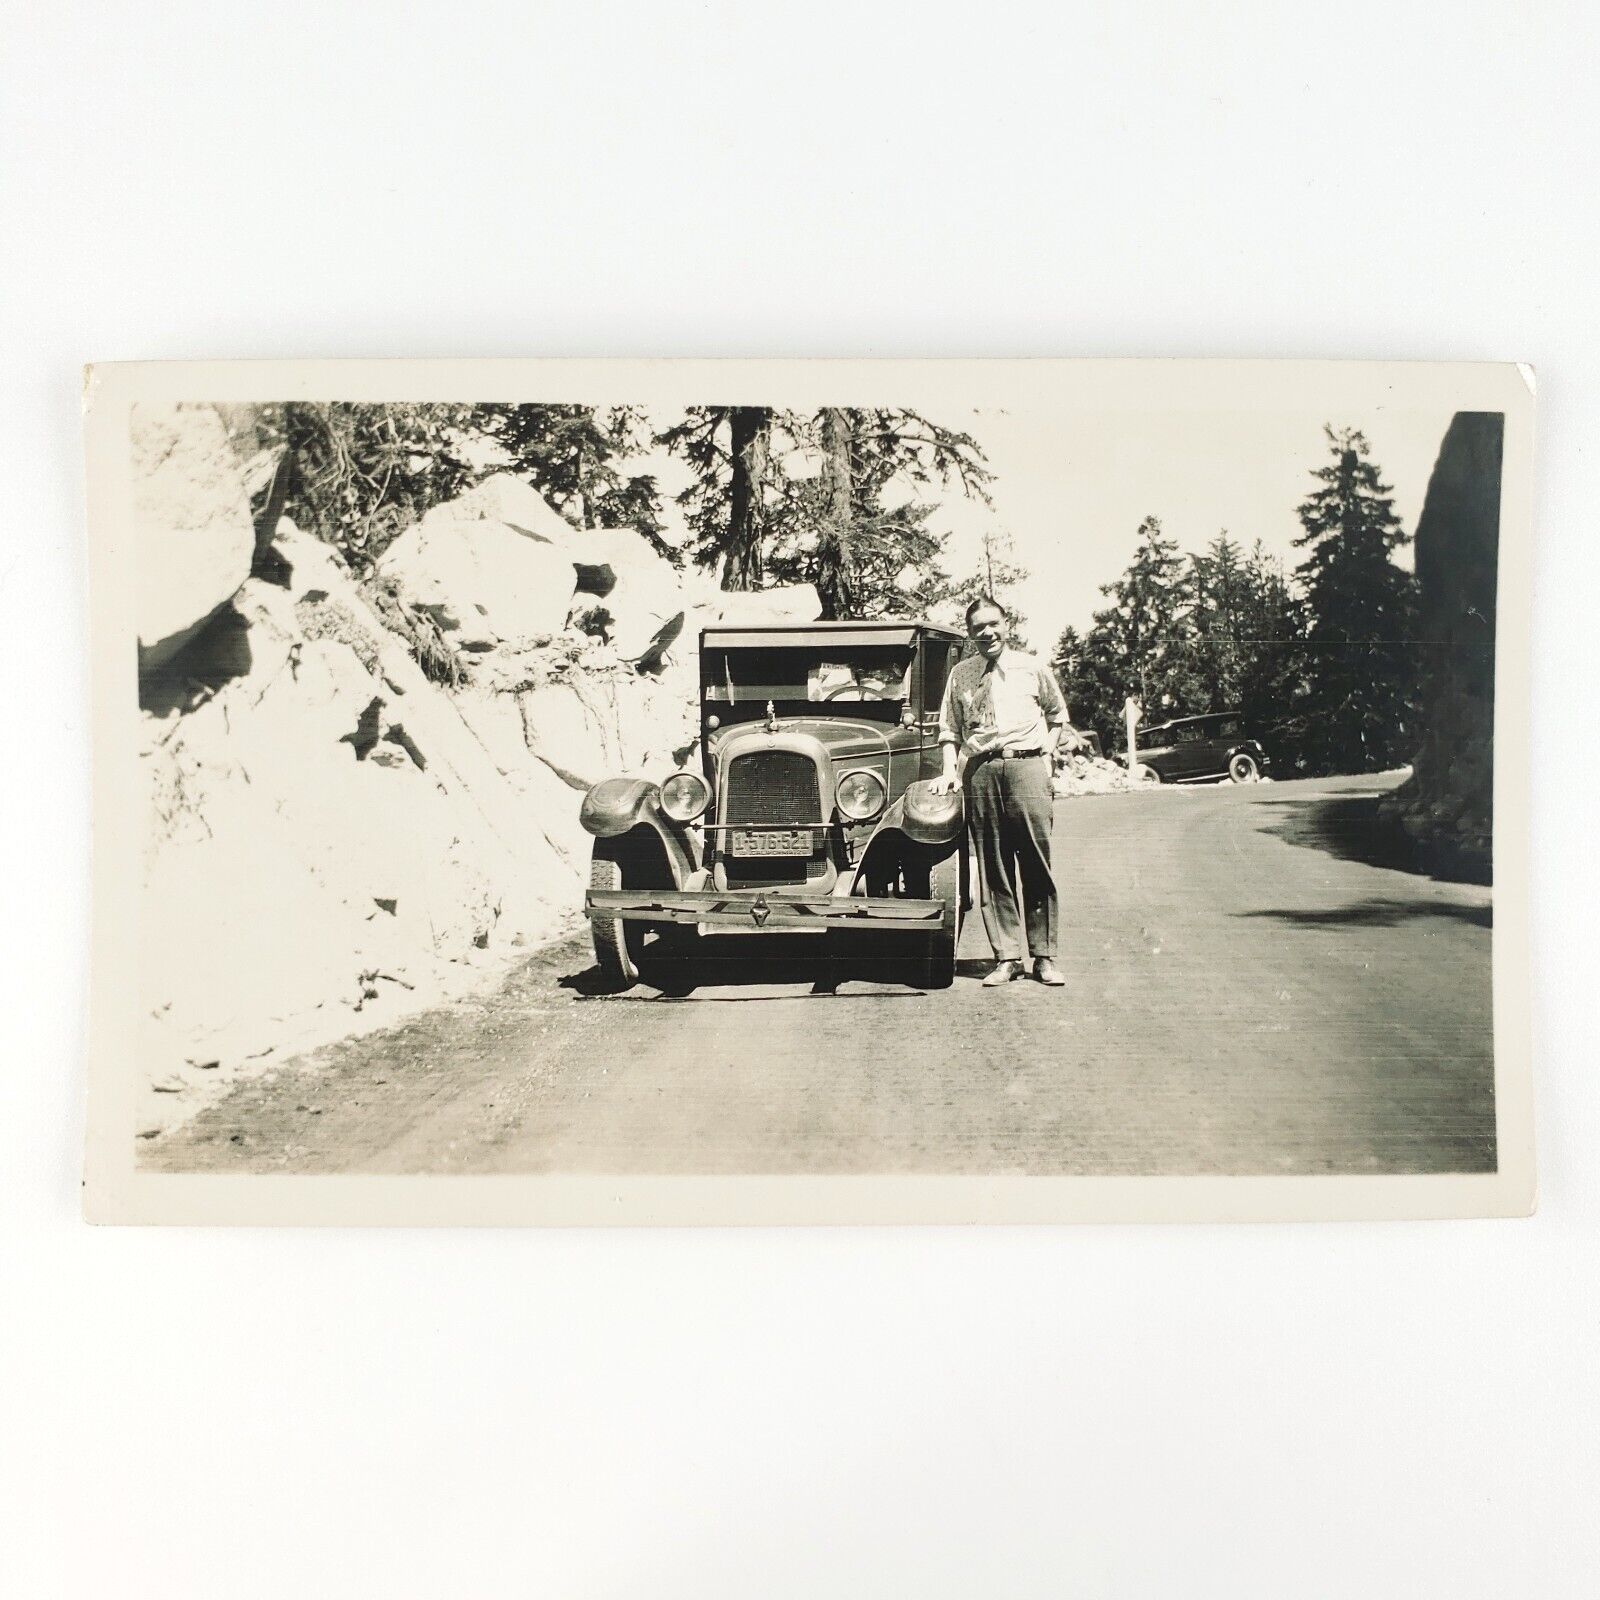 Jewett Car Mountain Road Photo 1930s Old Classic Automobile Found Snapshot D1701